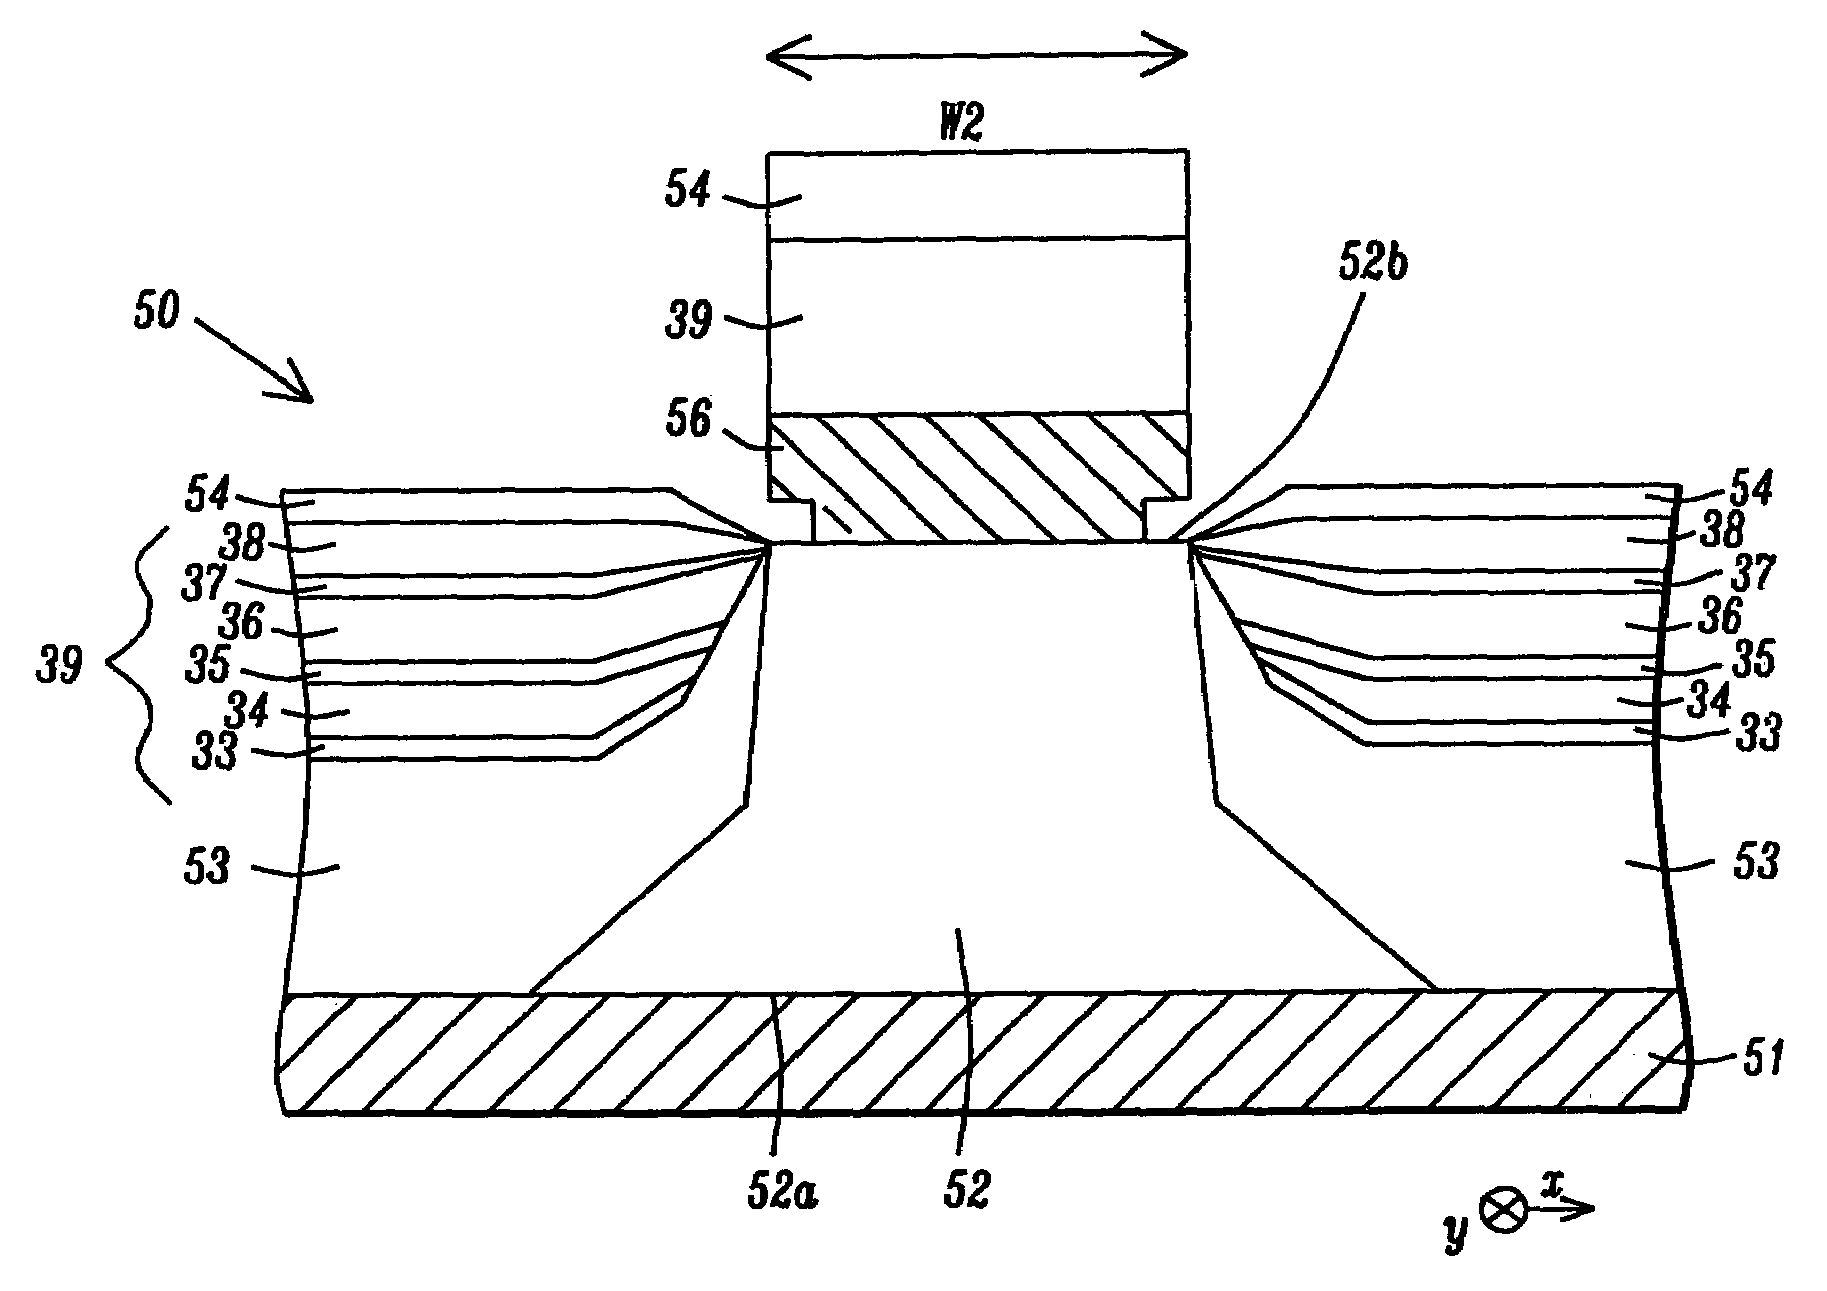 Method of forming a hard bias structure in a magnetic head